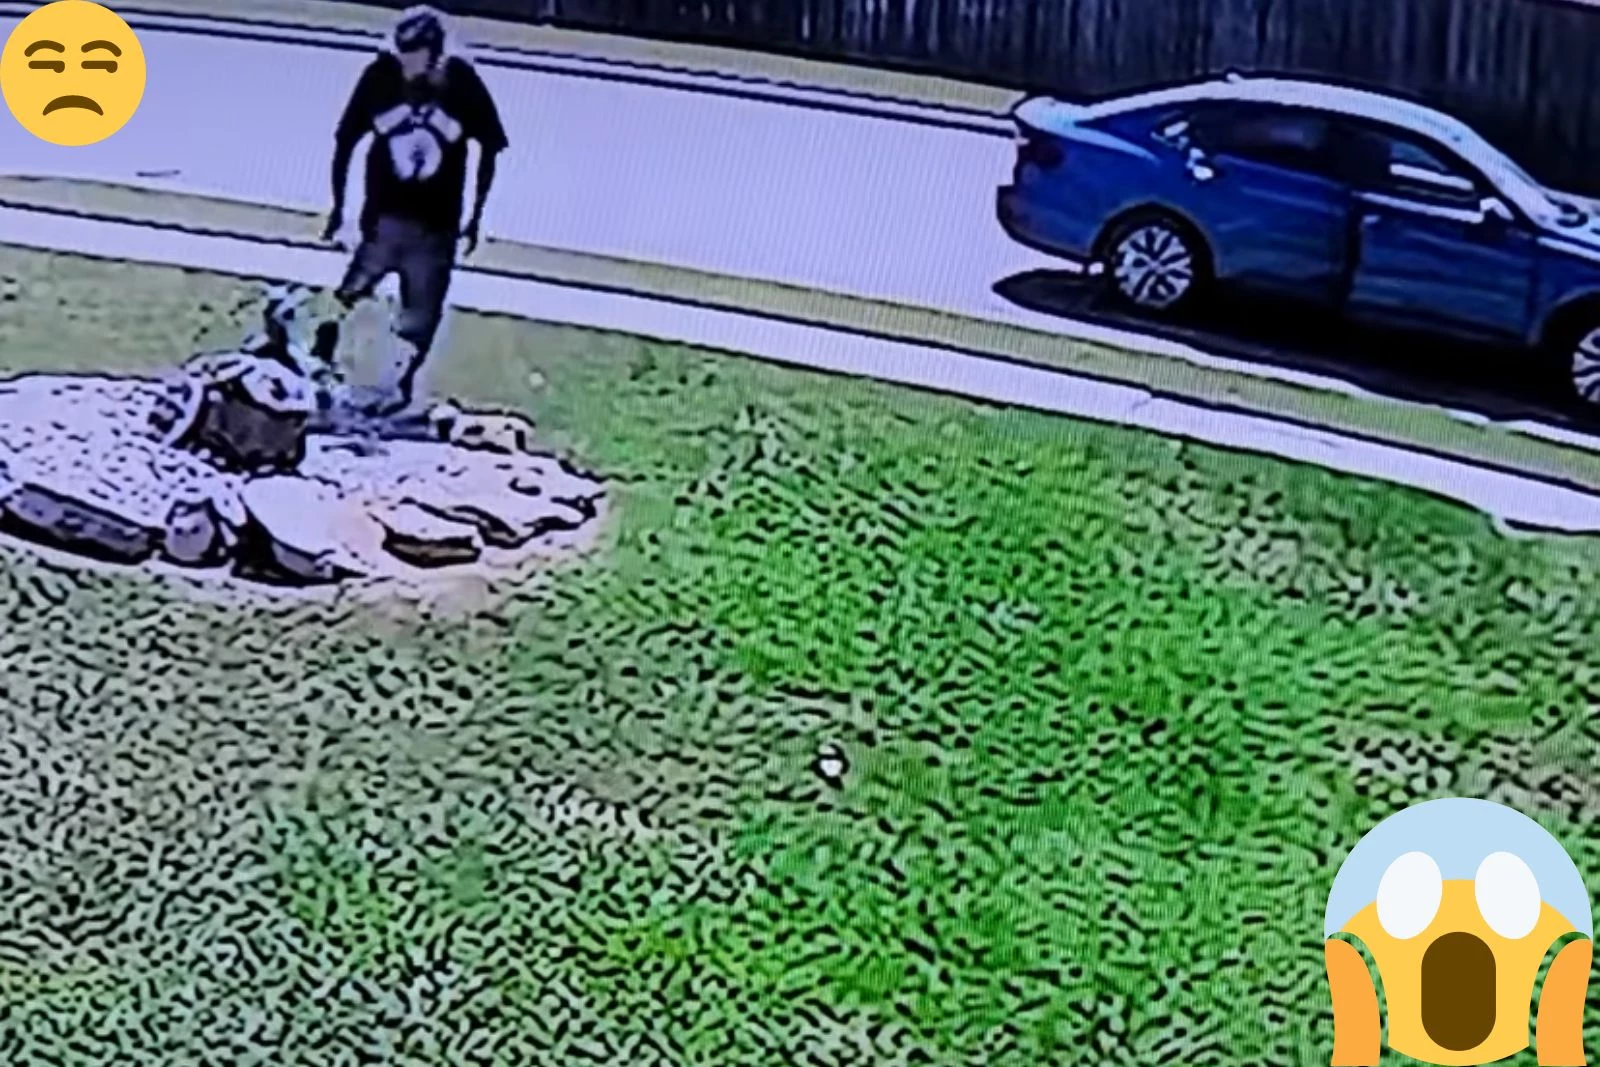 Help! Killeen, Texas Is Looking For Alleged Thief Spotted in Yard